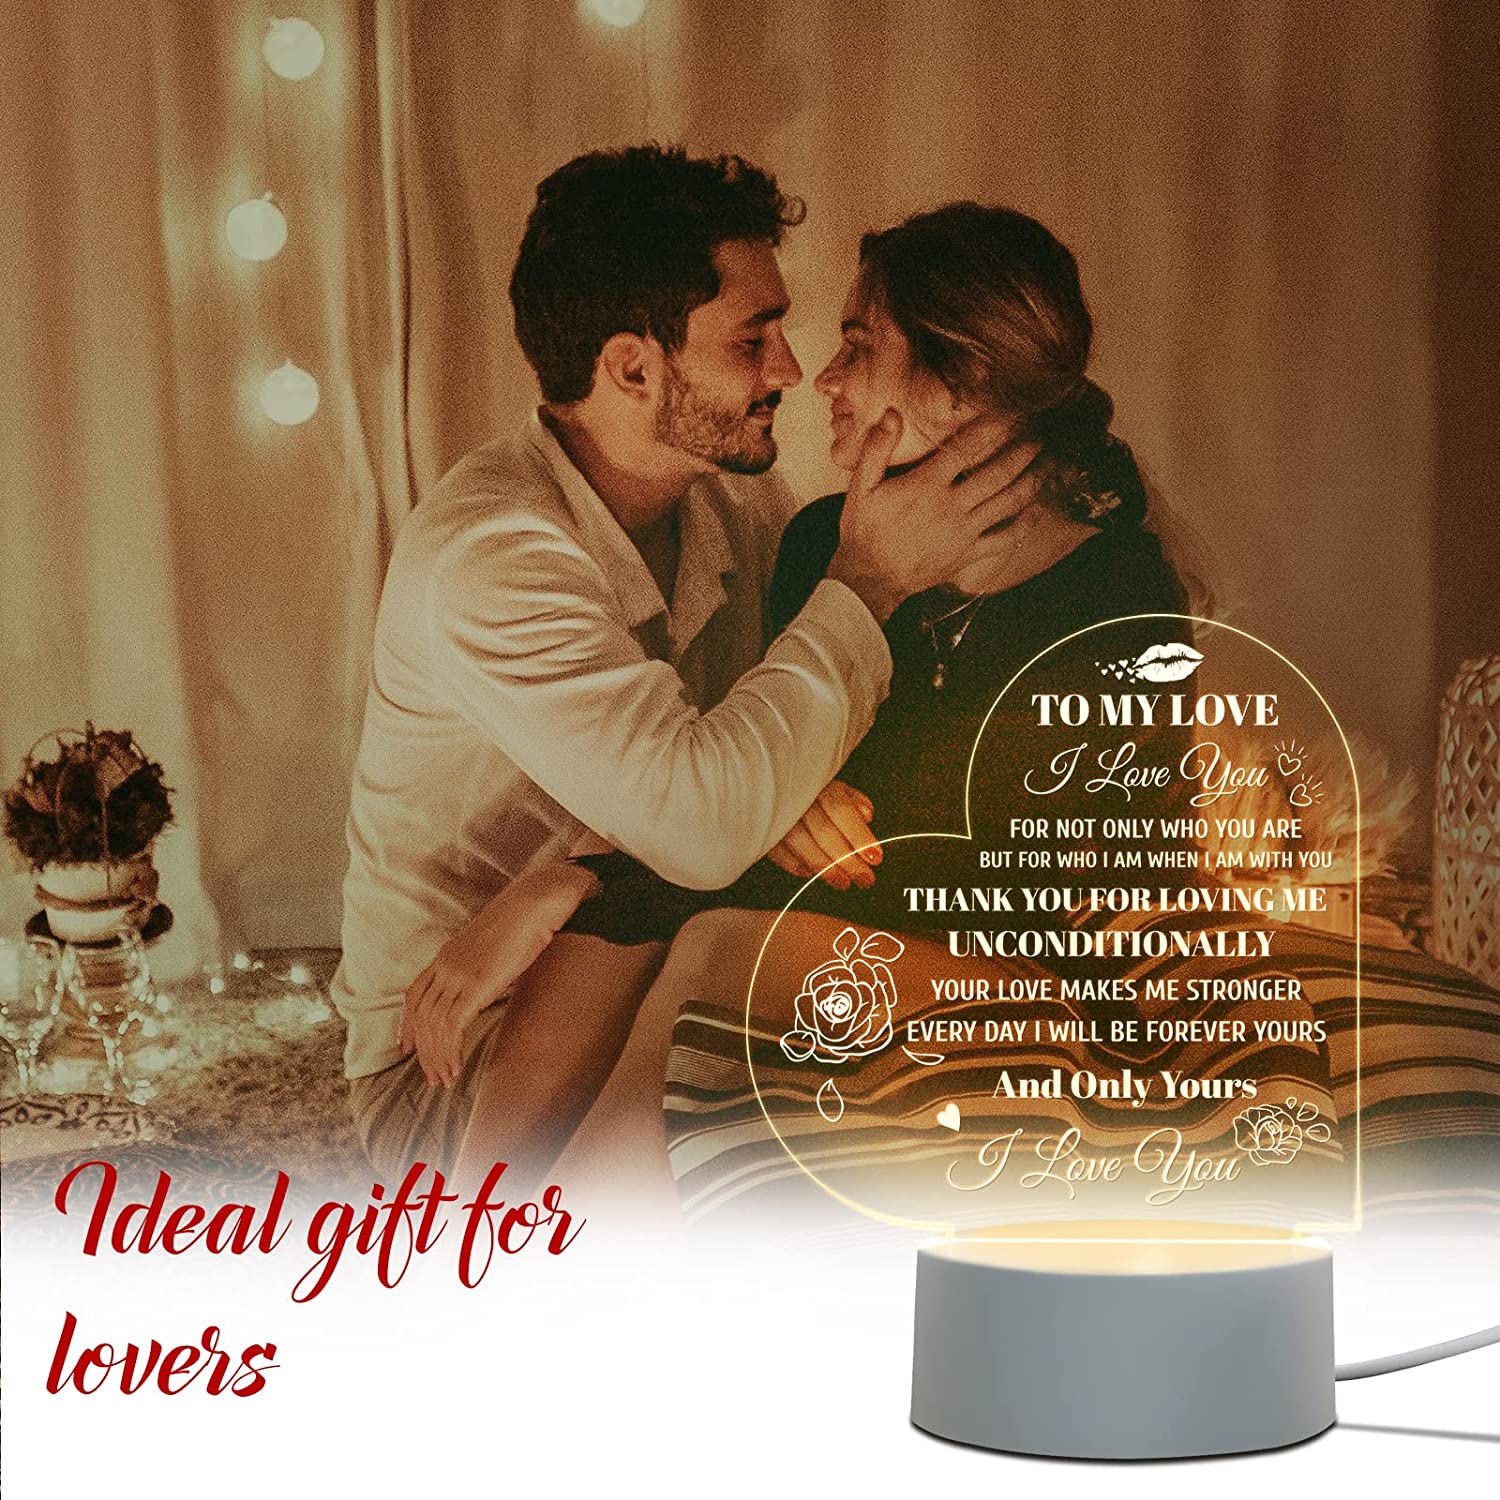 Gifts for Her - Anniversary, Christmas, Valentine, Birthday, Romantic Gifts for Her, Women, Girlfriend, Wife Gift Ideas from Husband Men Him